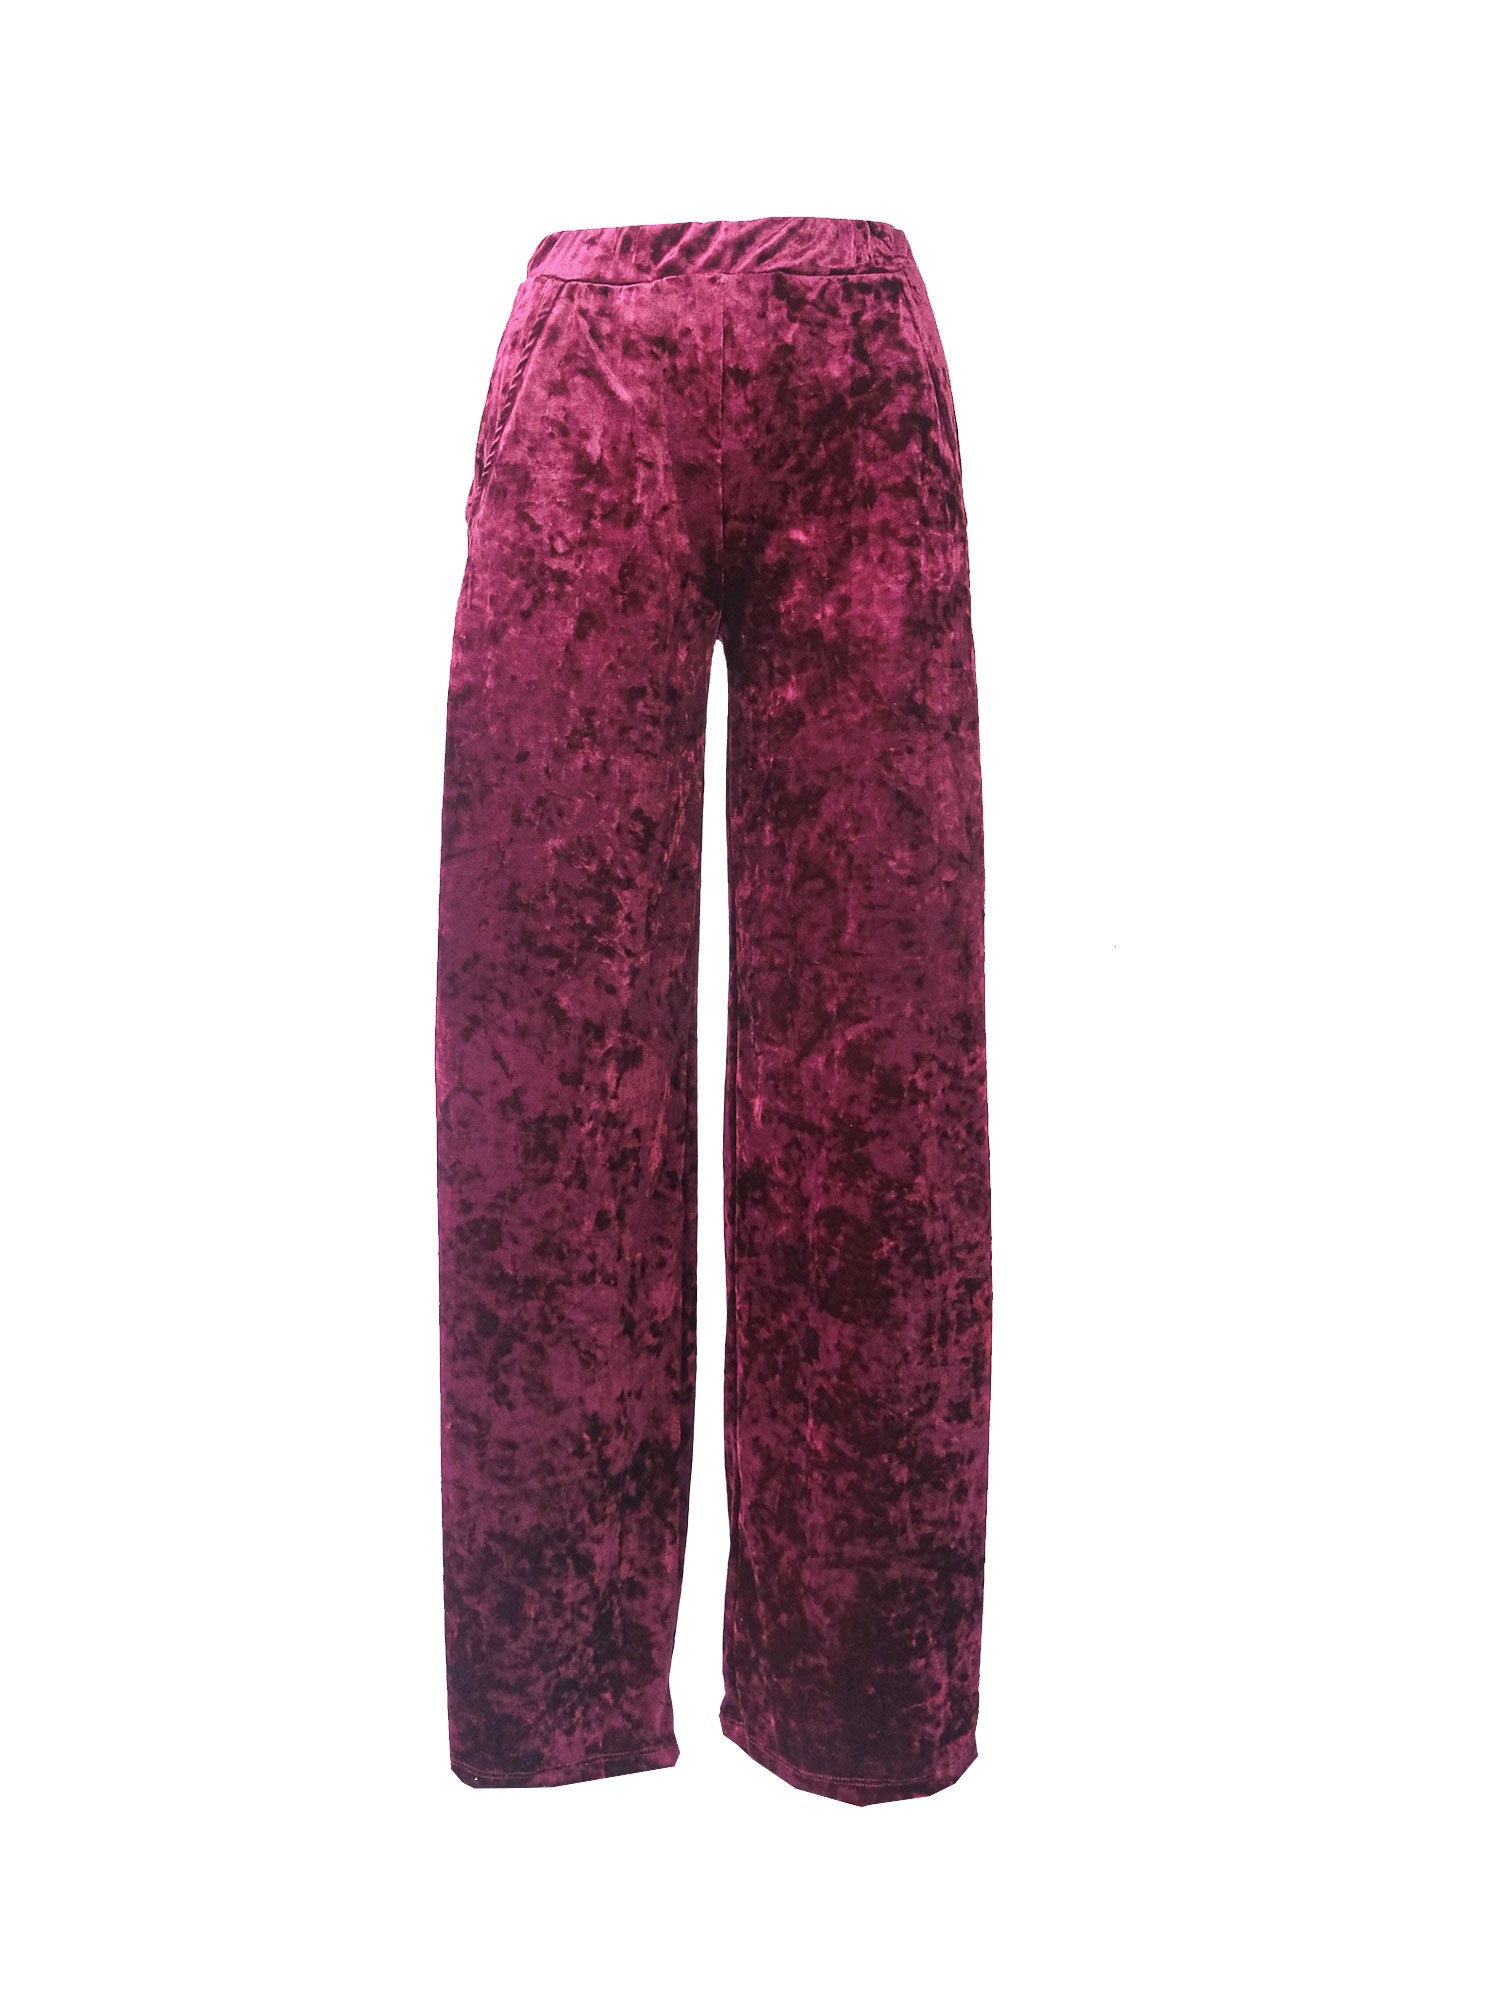 MAXIE - palazzo trousers with sides pockets in bordeaux hammered chenille